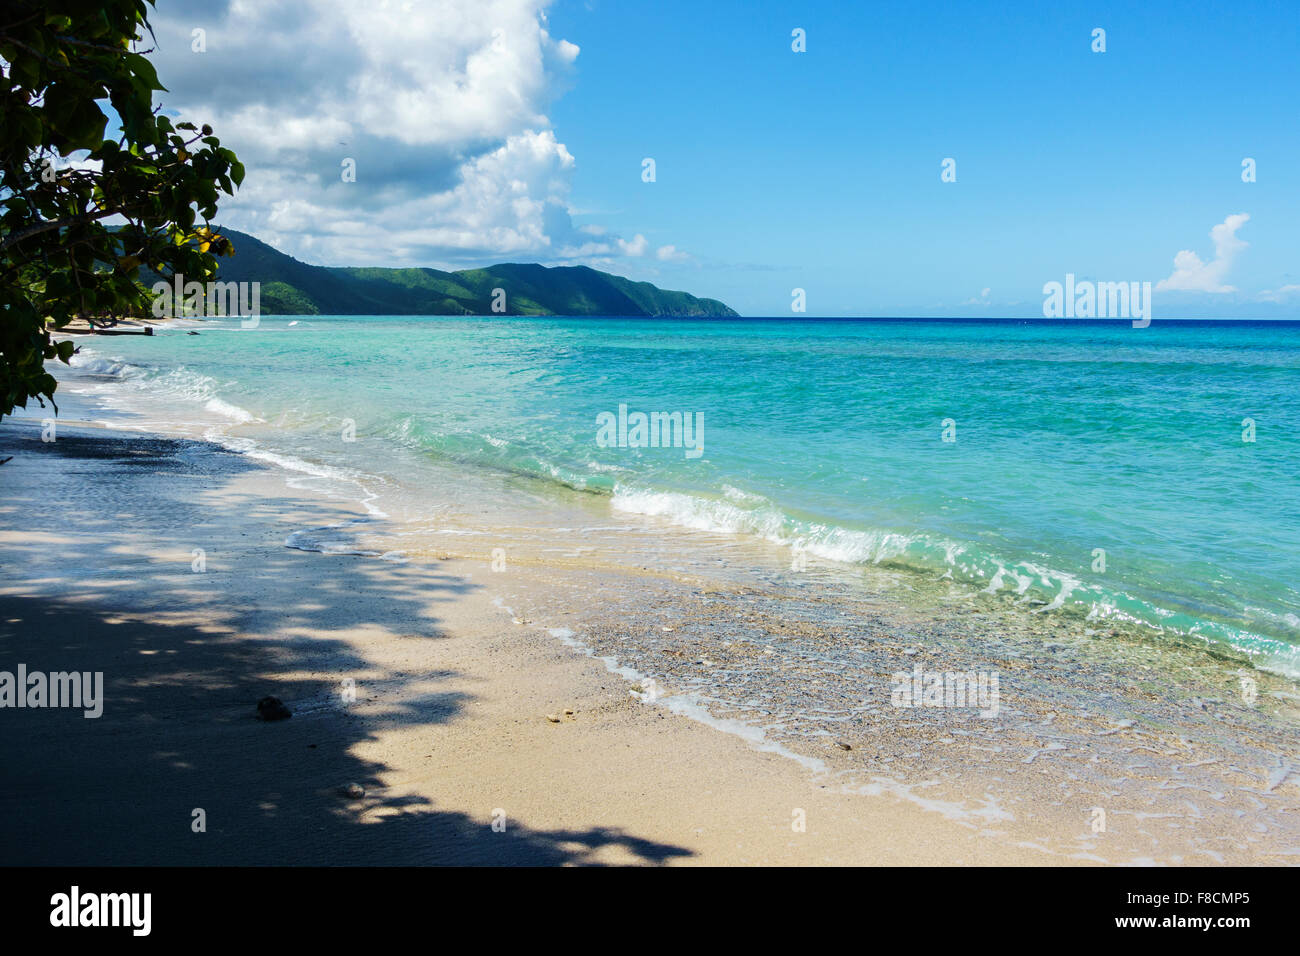 An image of the north shore of St. Croix, U.S. Virgin Islands. Stock Photo